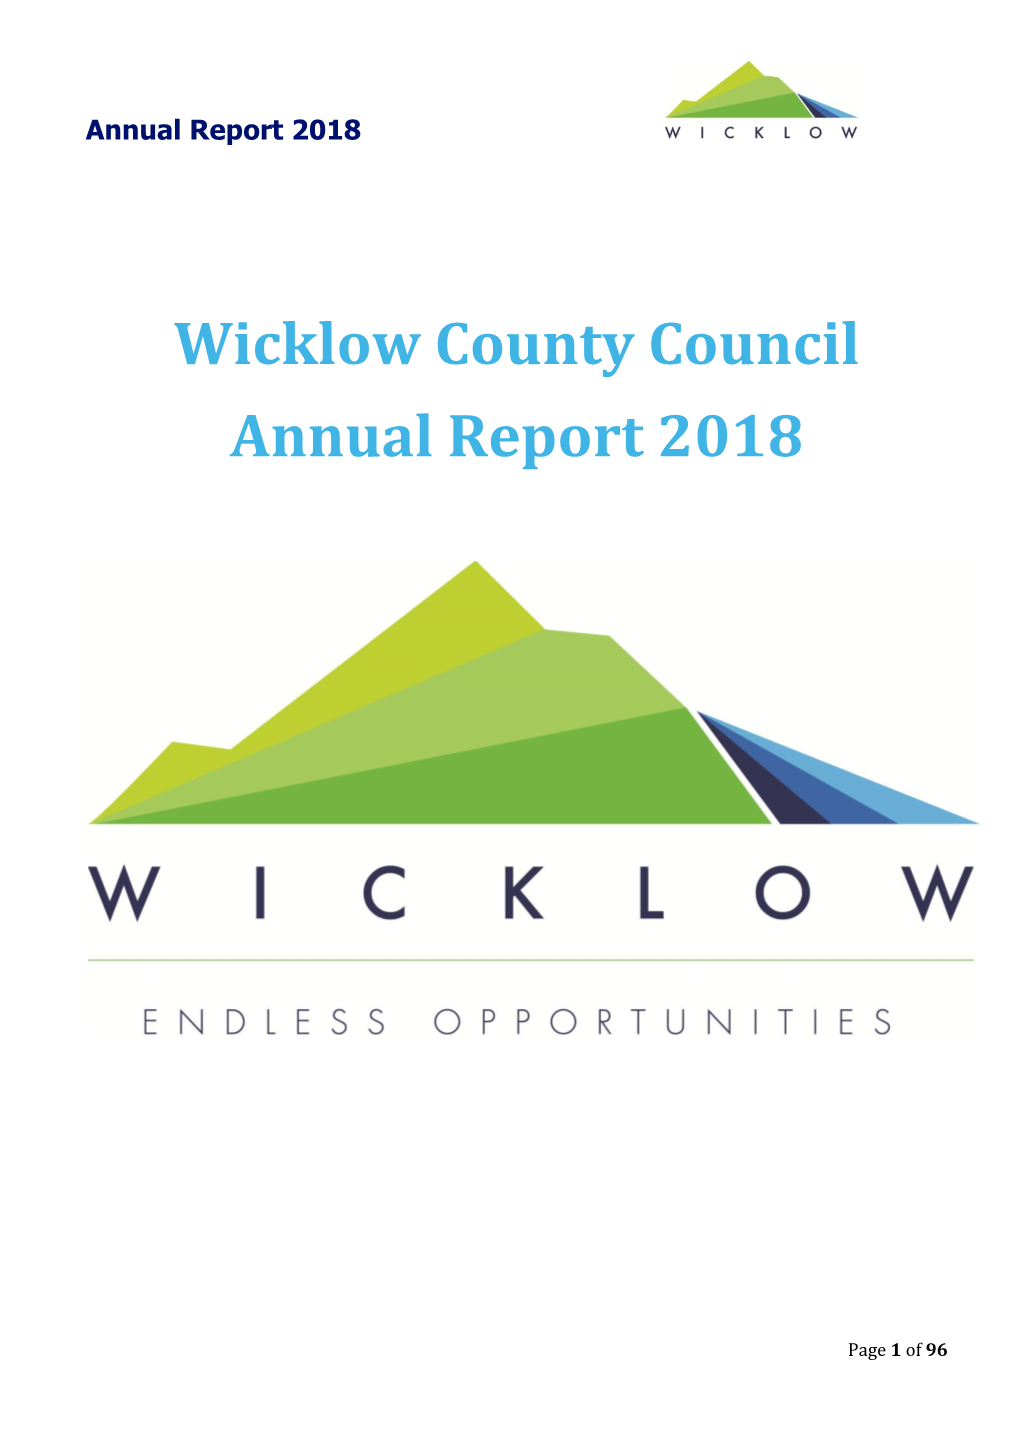 Wicklow County Council Annual Report 2018